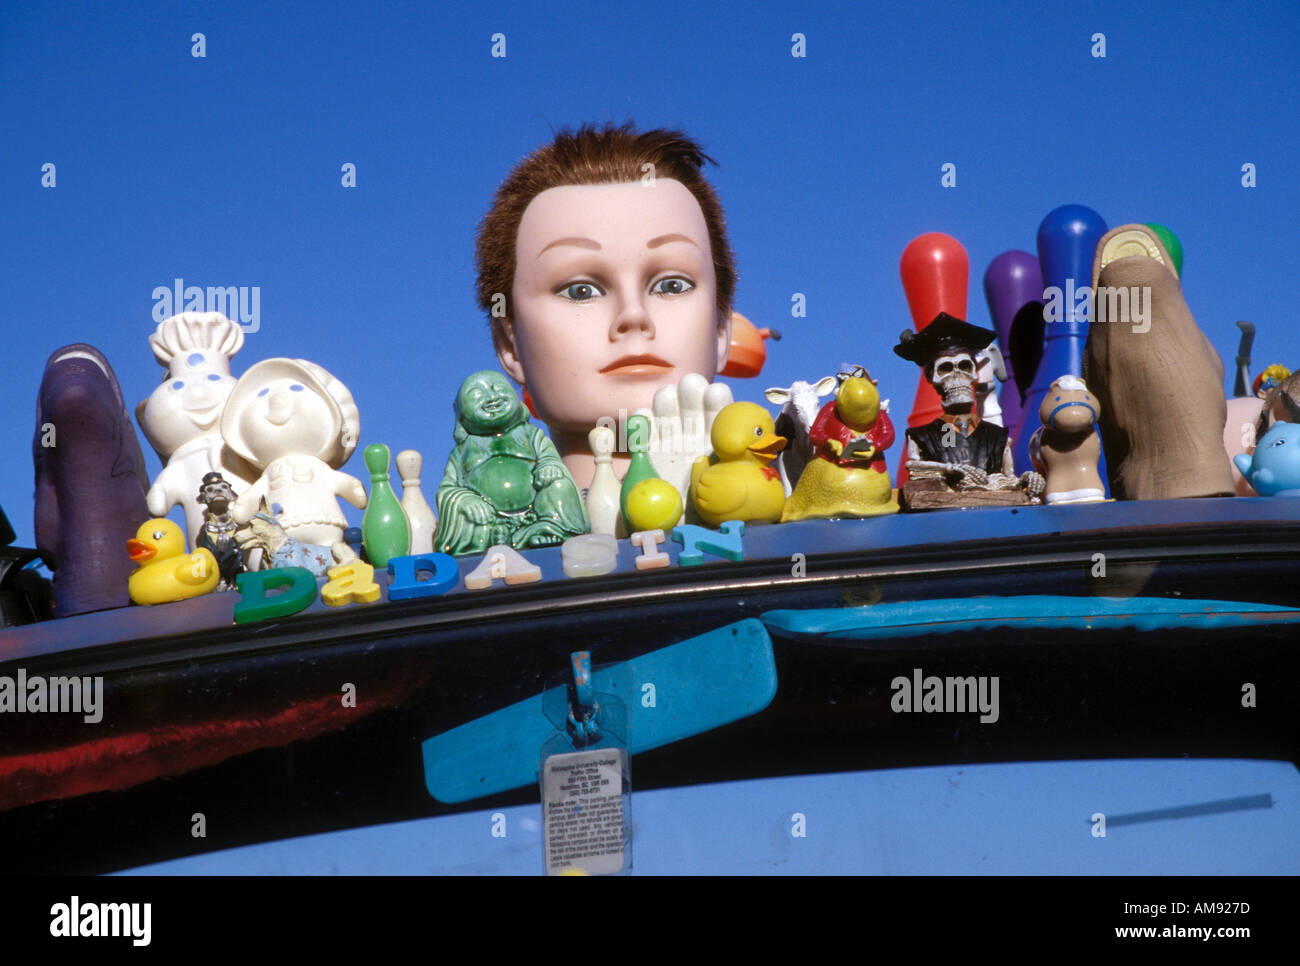 Toys Glued on Roof of Car Stock Photo